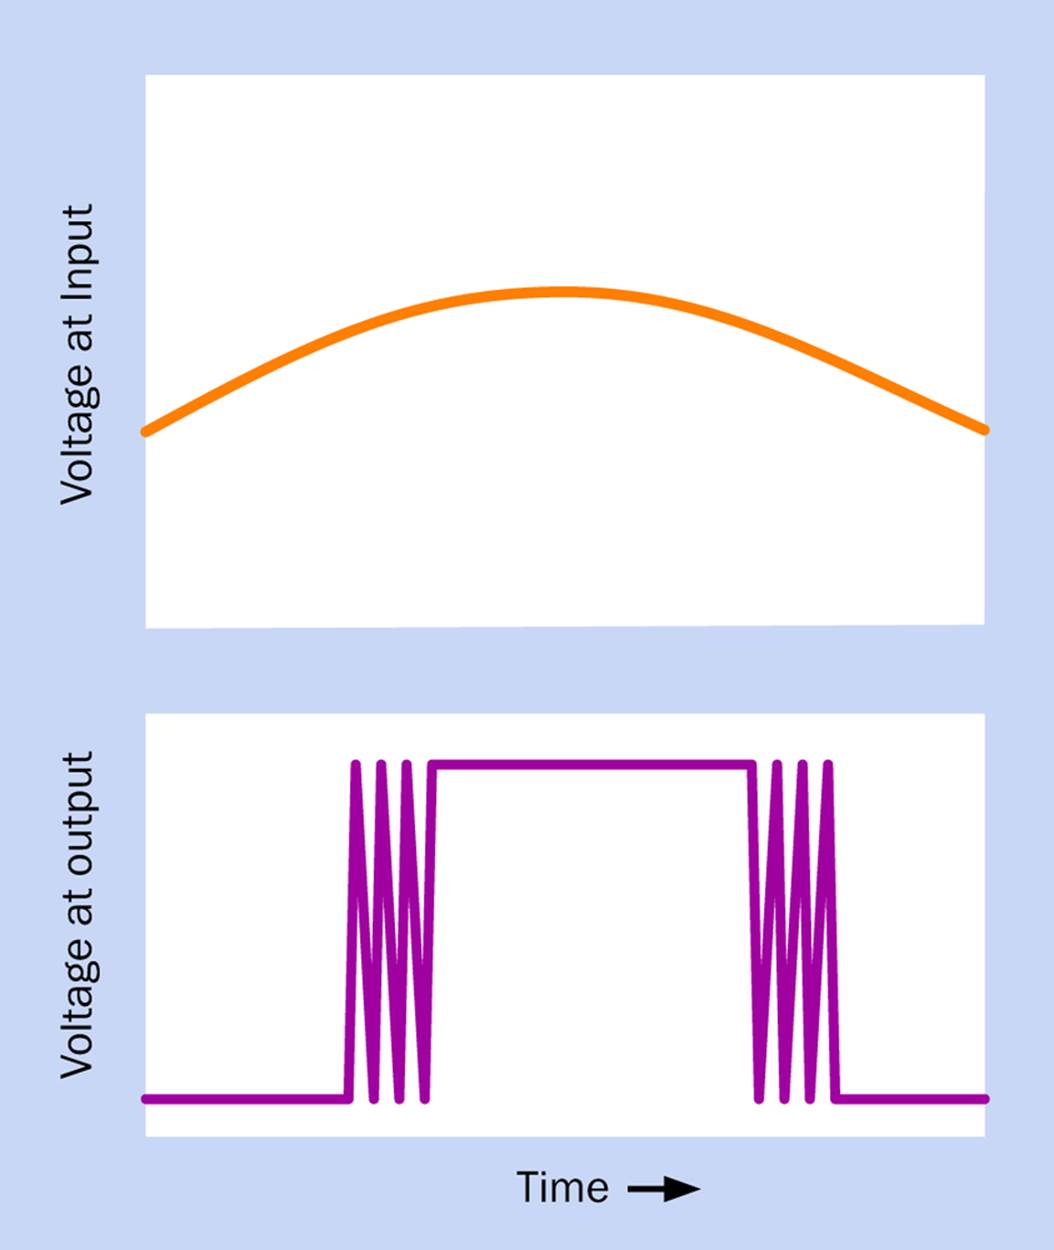 When a comparator receives a slowly changing input (upper graph), its output tends to oscillate unpredictably (lower graph) between “on” and “off.”